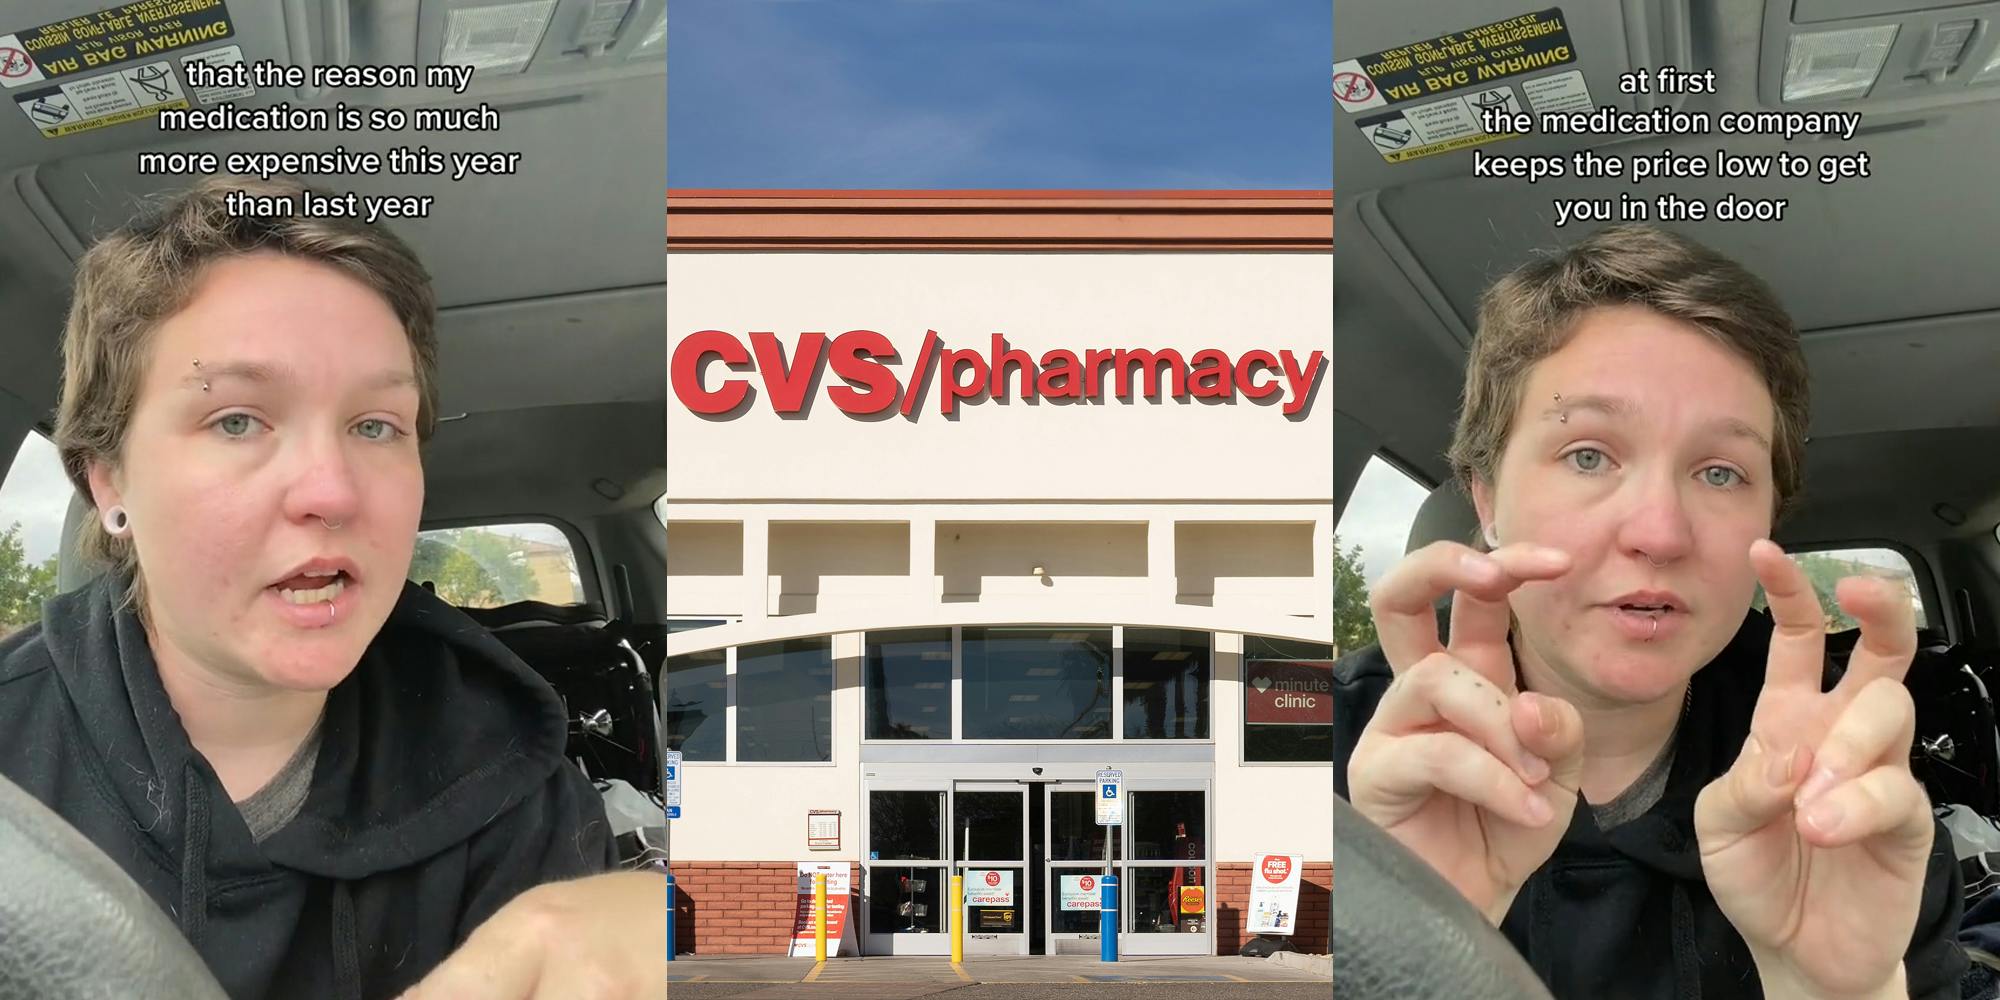 CVS customer speaking in car with caption "that the reason my medication is so much more expensive this year than last year" (l) CVS Pharmacy building with sign and blue sky (c) CVS customer speaking in car with caption "at first the medication company keeps the price low to get you in the door" (r)